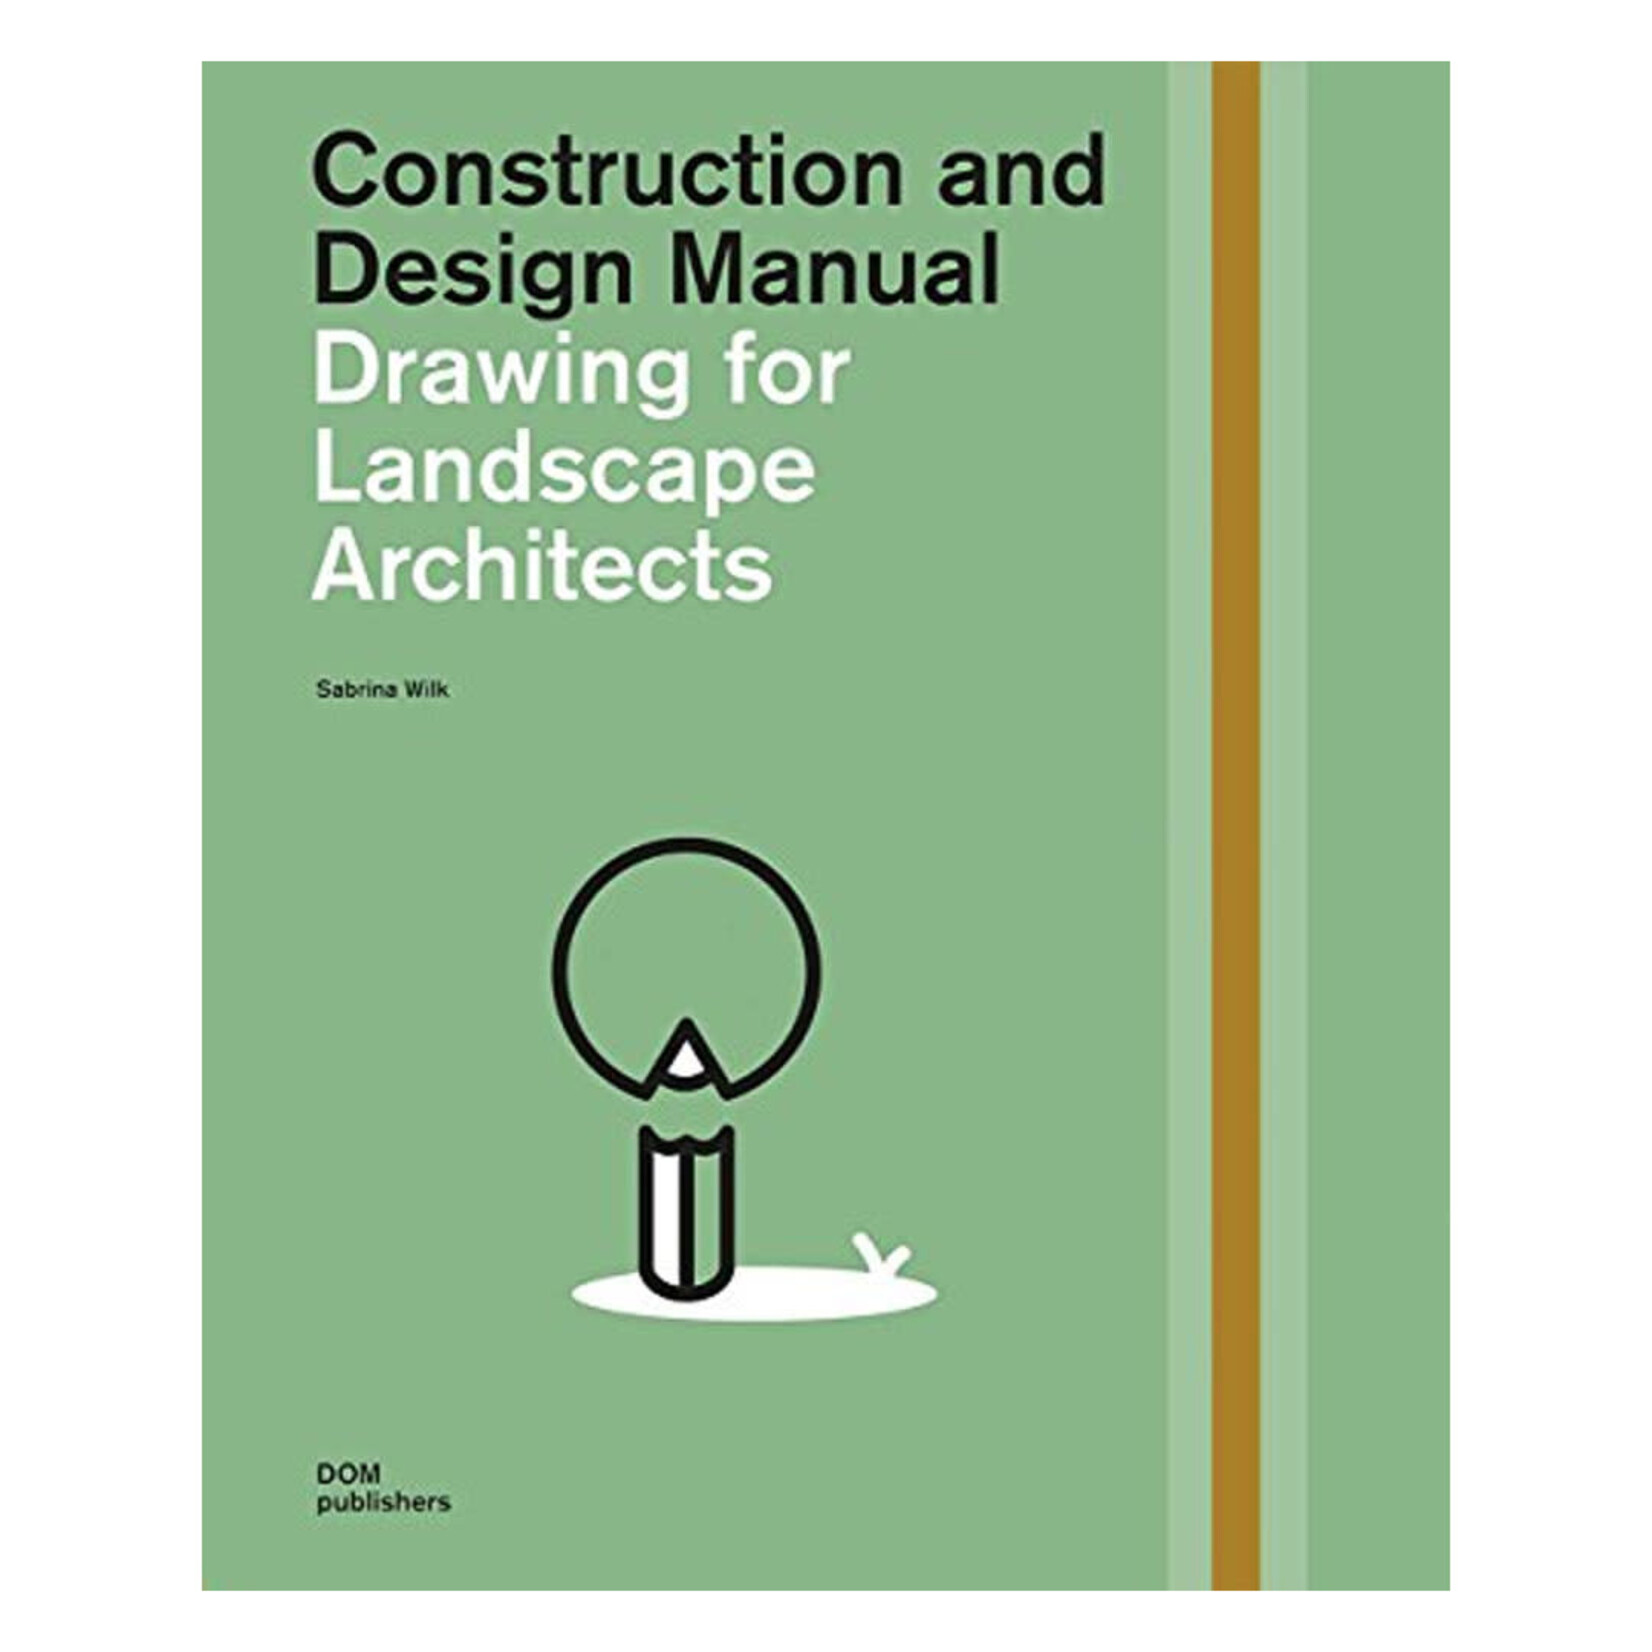 Construction and Design Manual: Drawing for Landscape Architects, Second Edition